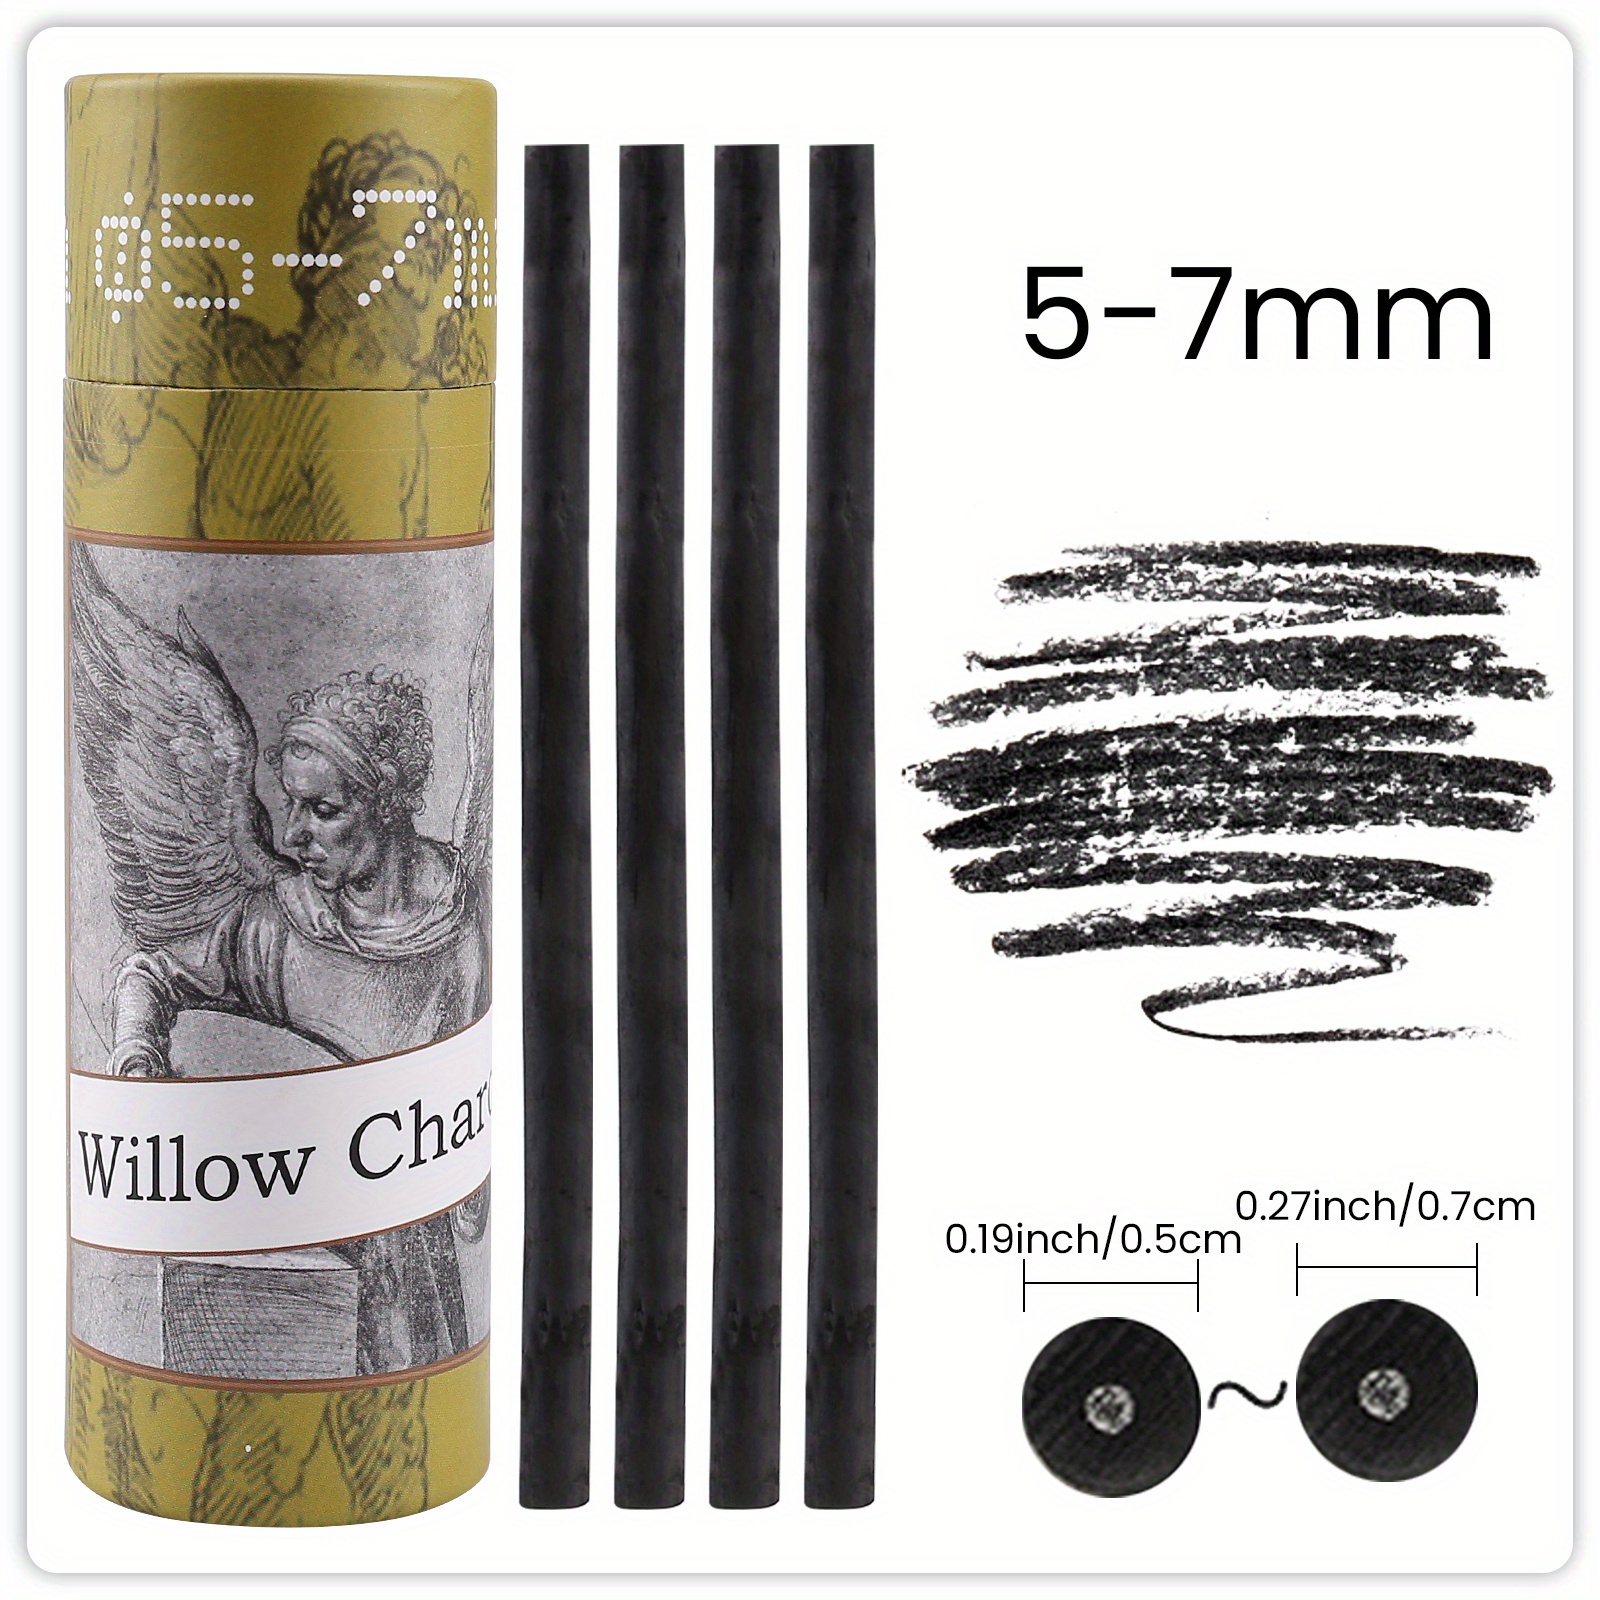  LOONENG Willow Charcoal Sticks, Natural Willow